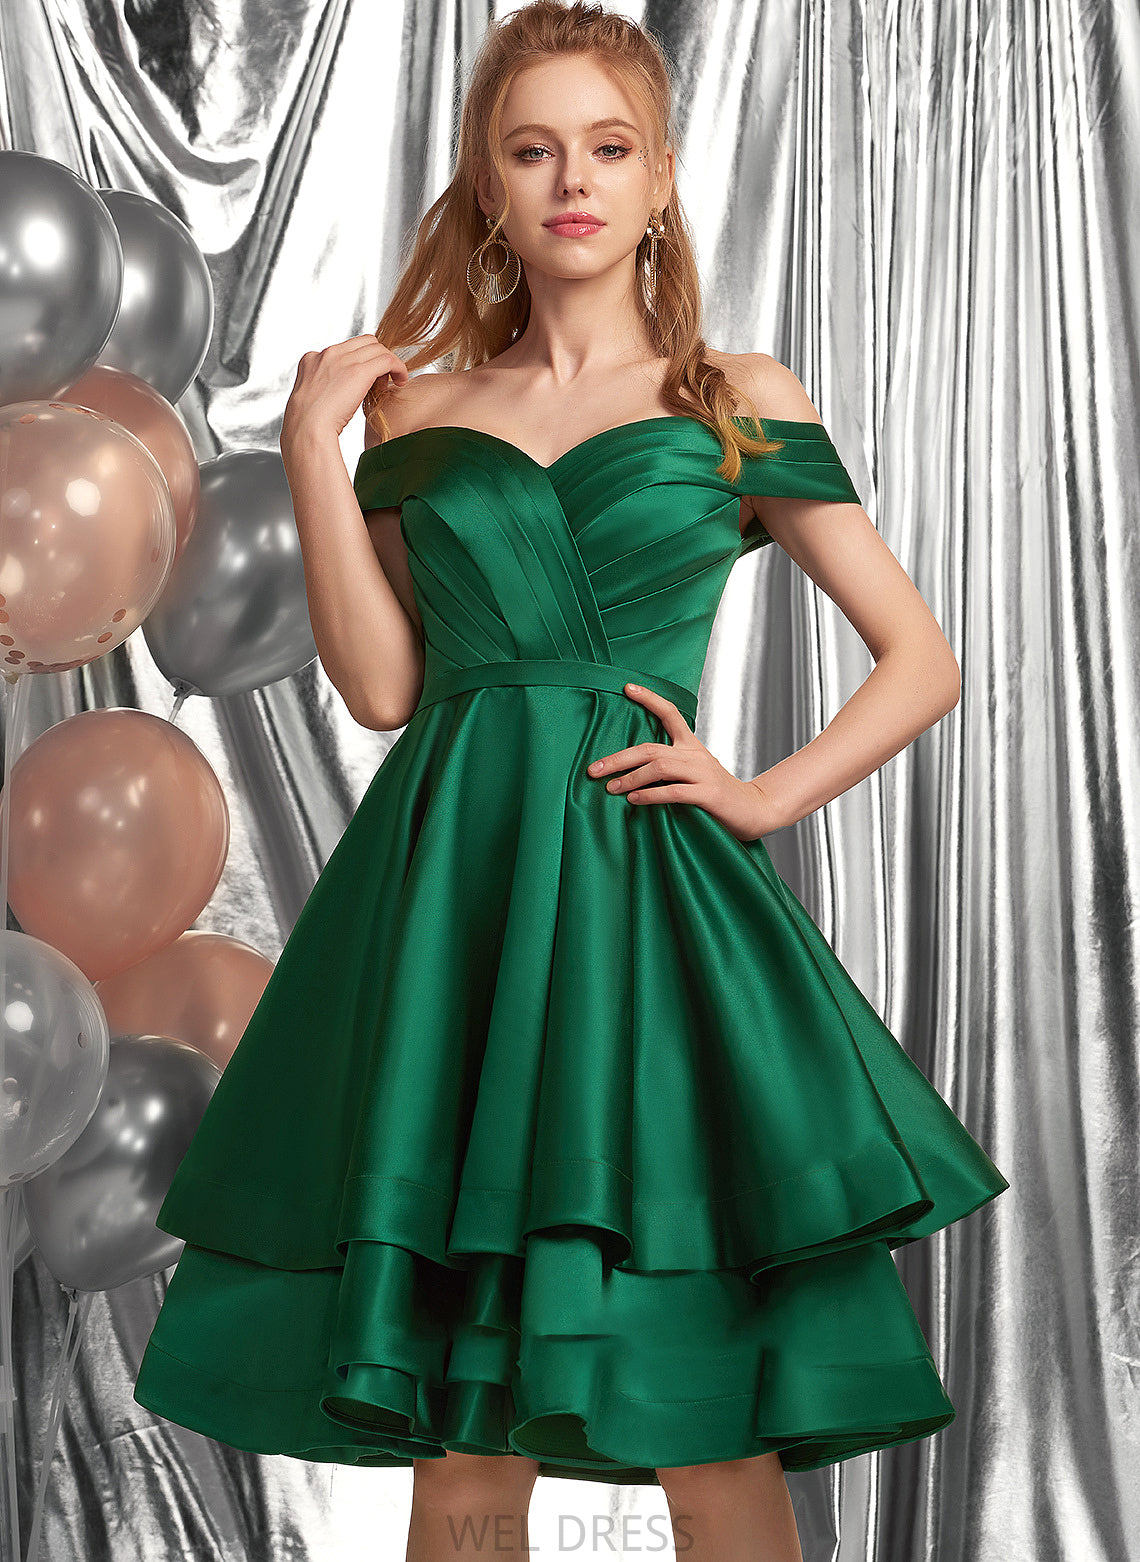 Prom Dresses Knee-Length A-Line Skylar With Satin Ruffle Off-the-Shoulder